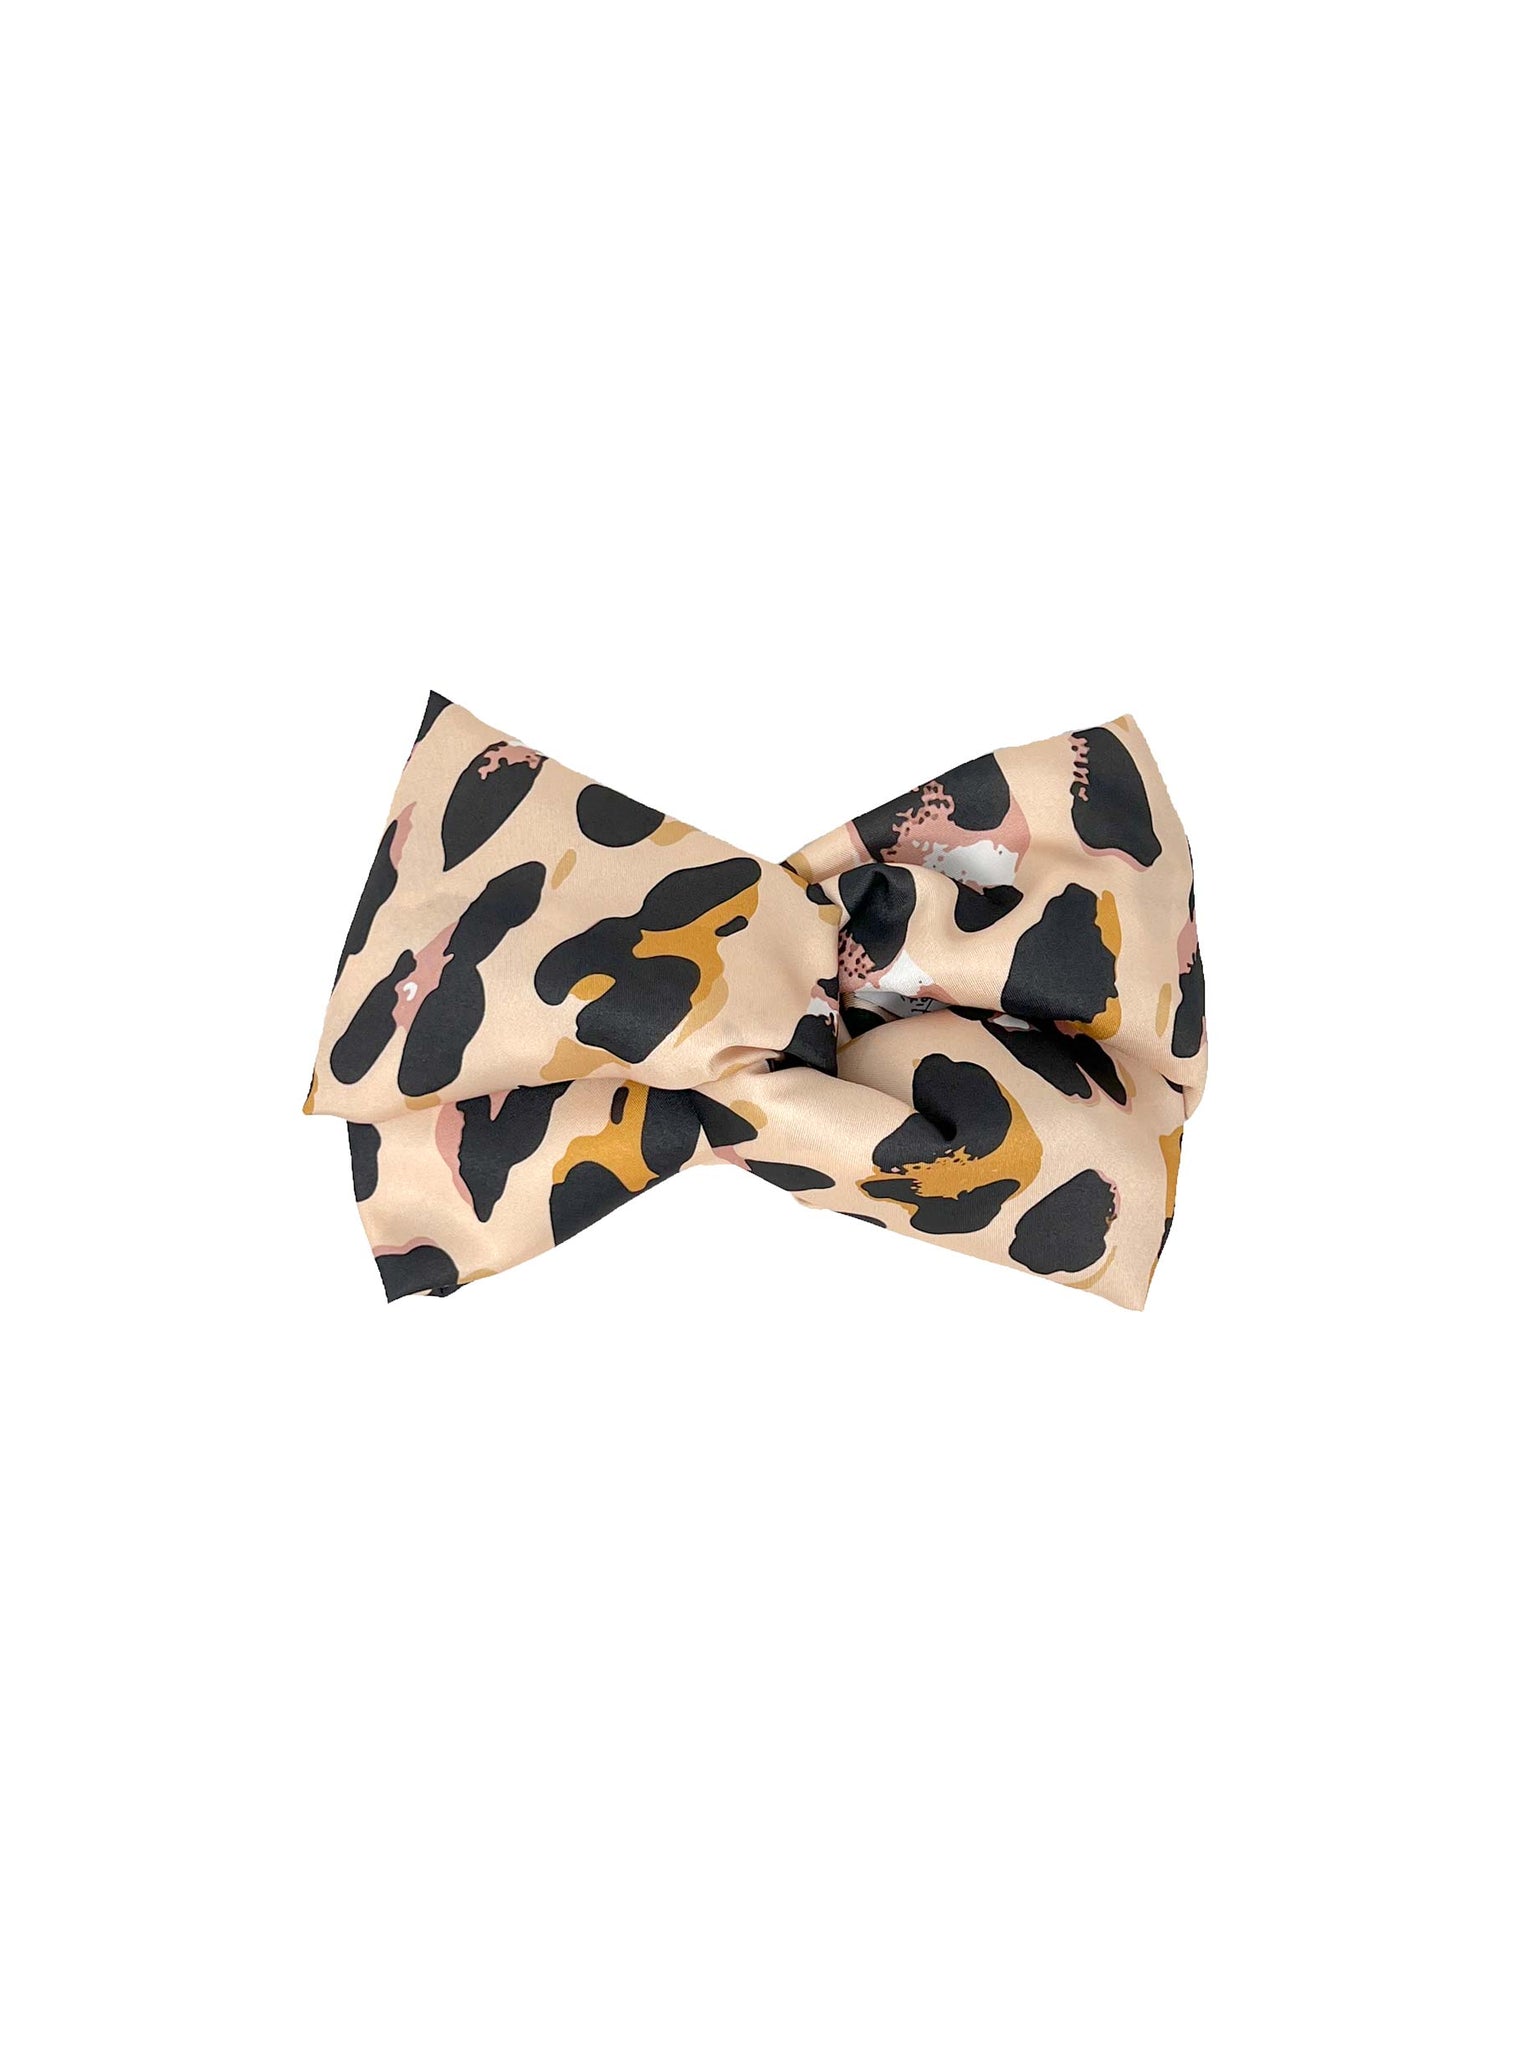 Pink and black spotted patterned satin headband